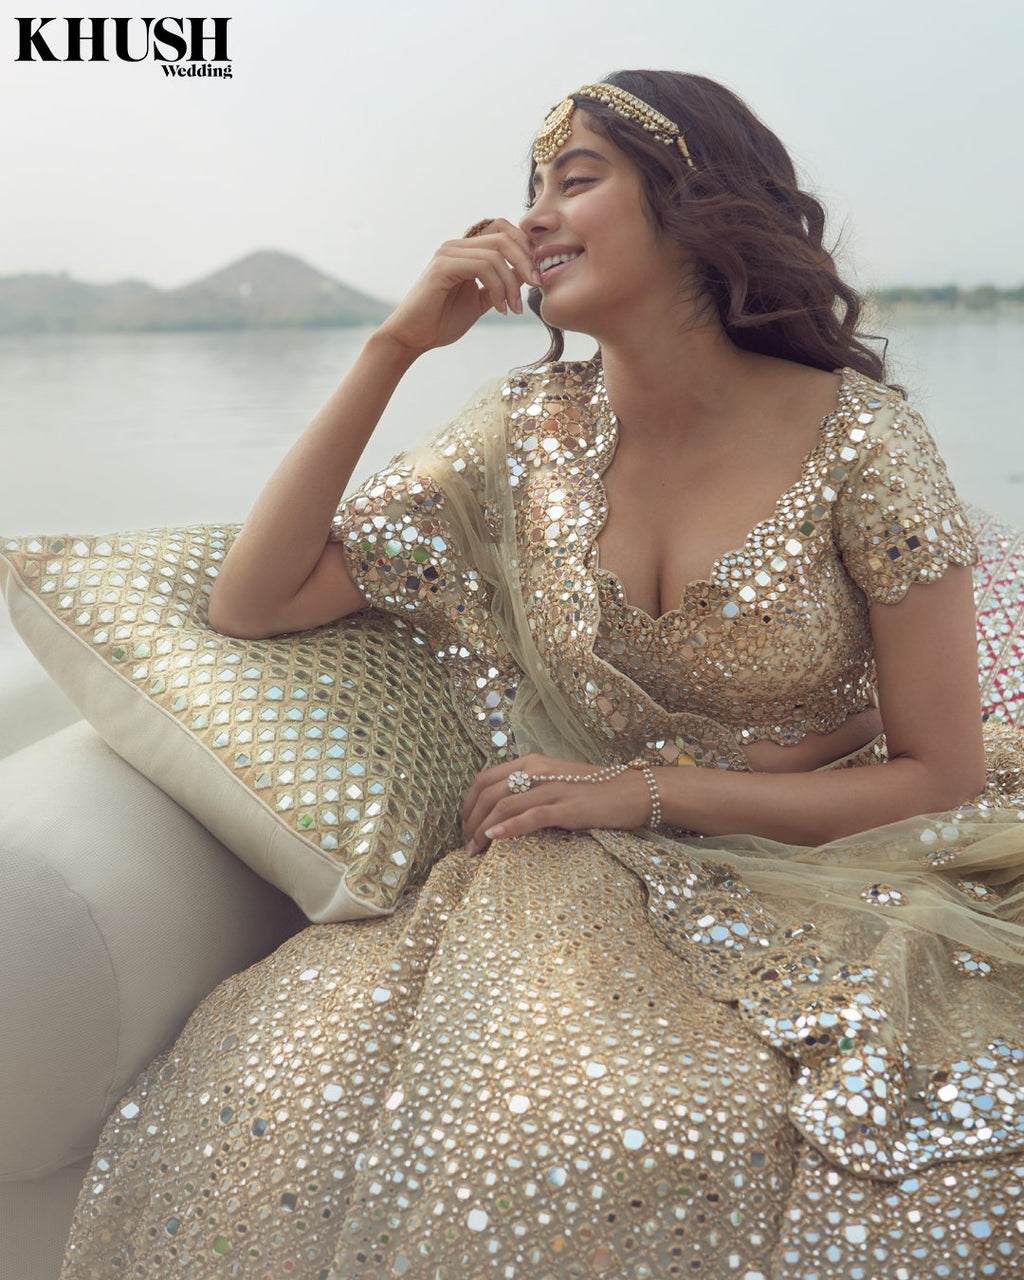 Janhvi Kapoor channels glam icon vibes in a silver mesh gown | Times of  India